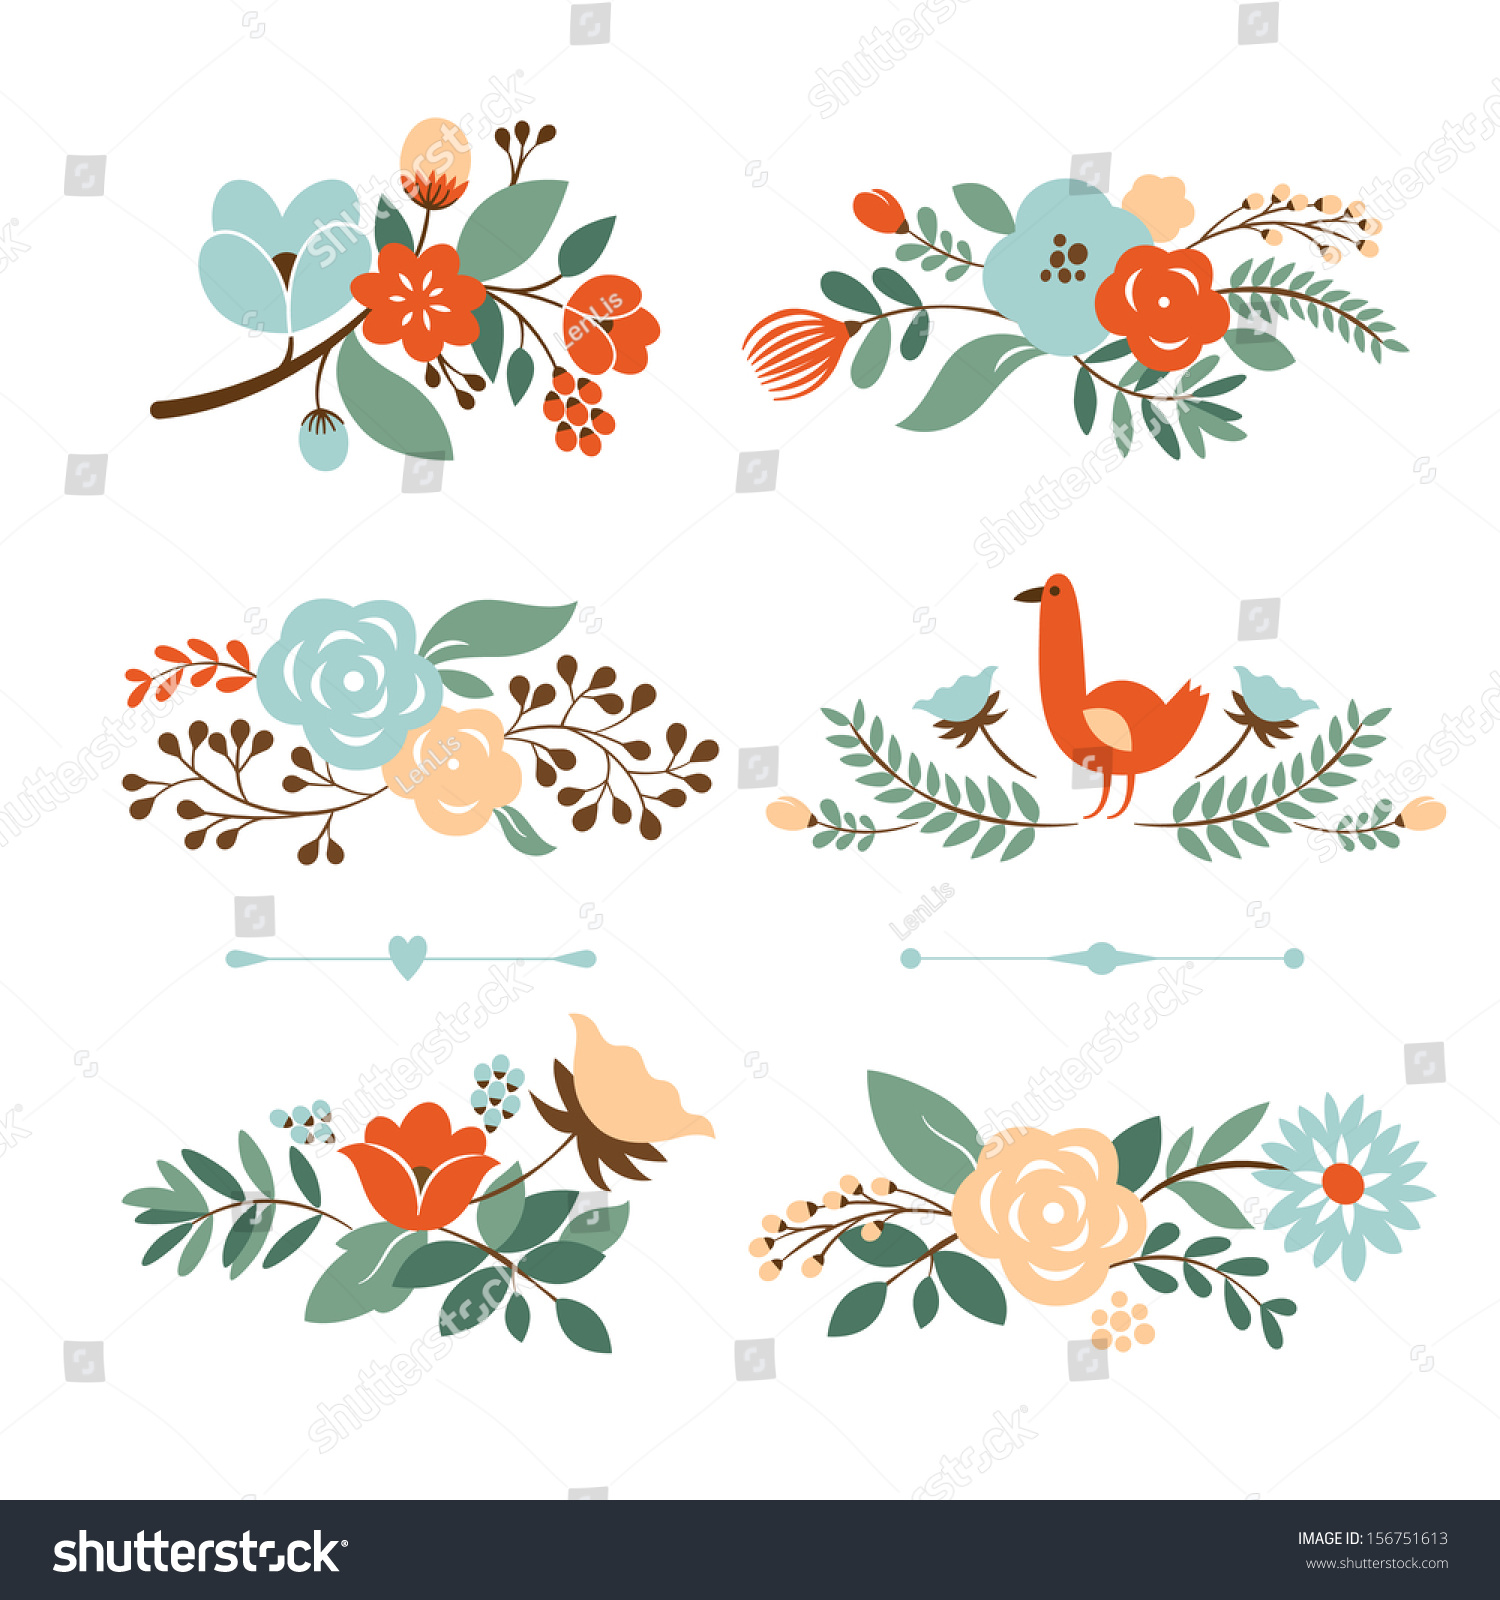 floral wedding clipart free download - photo #20